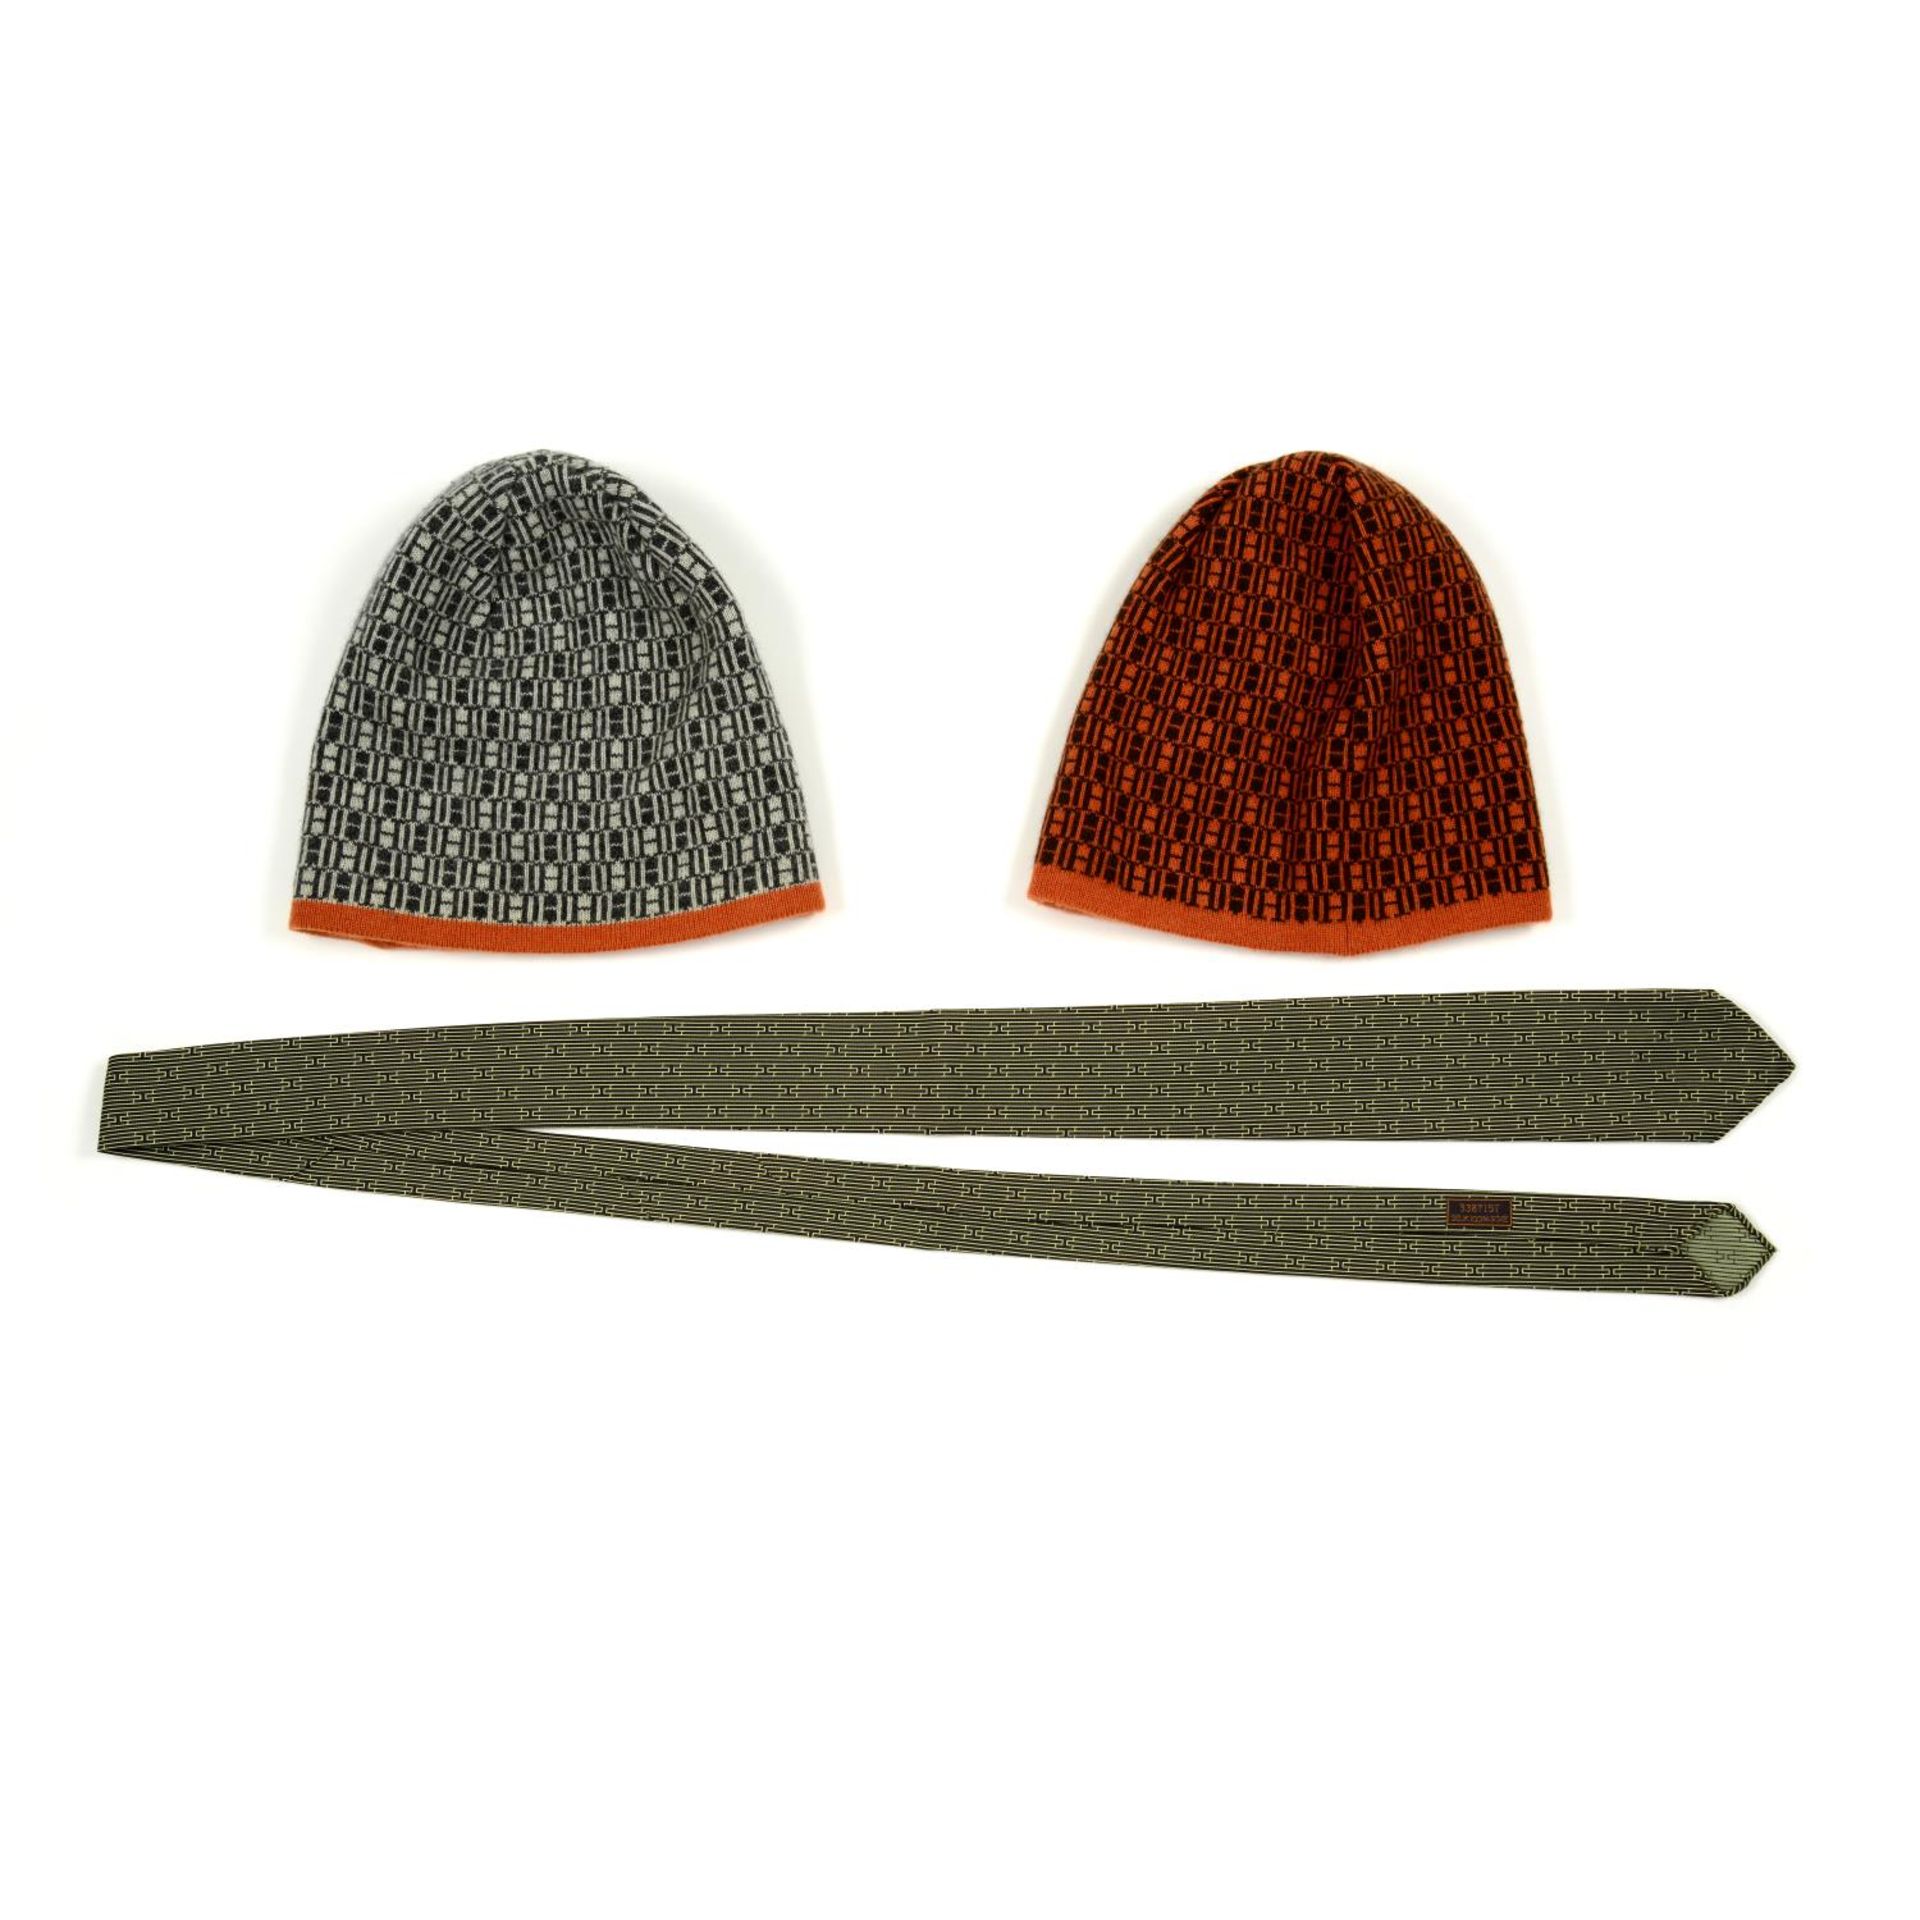 HERMÈS - a silk tie and two wool beanie hats. - Image 2 of 2